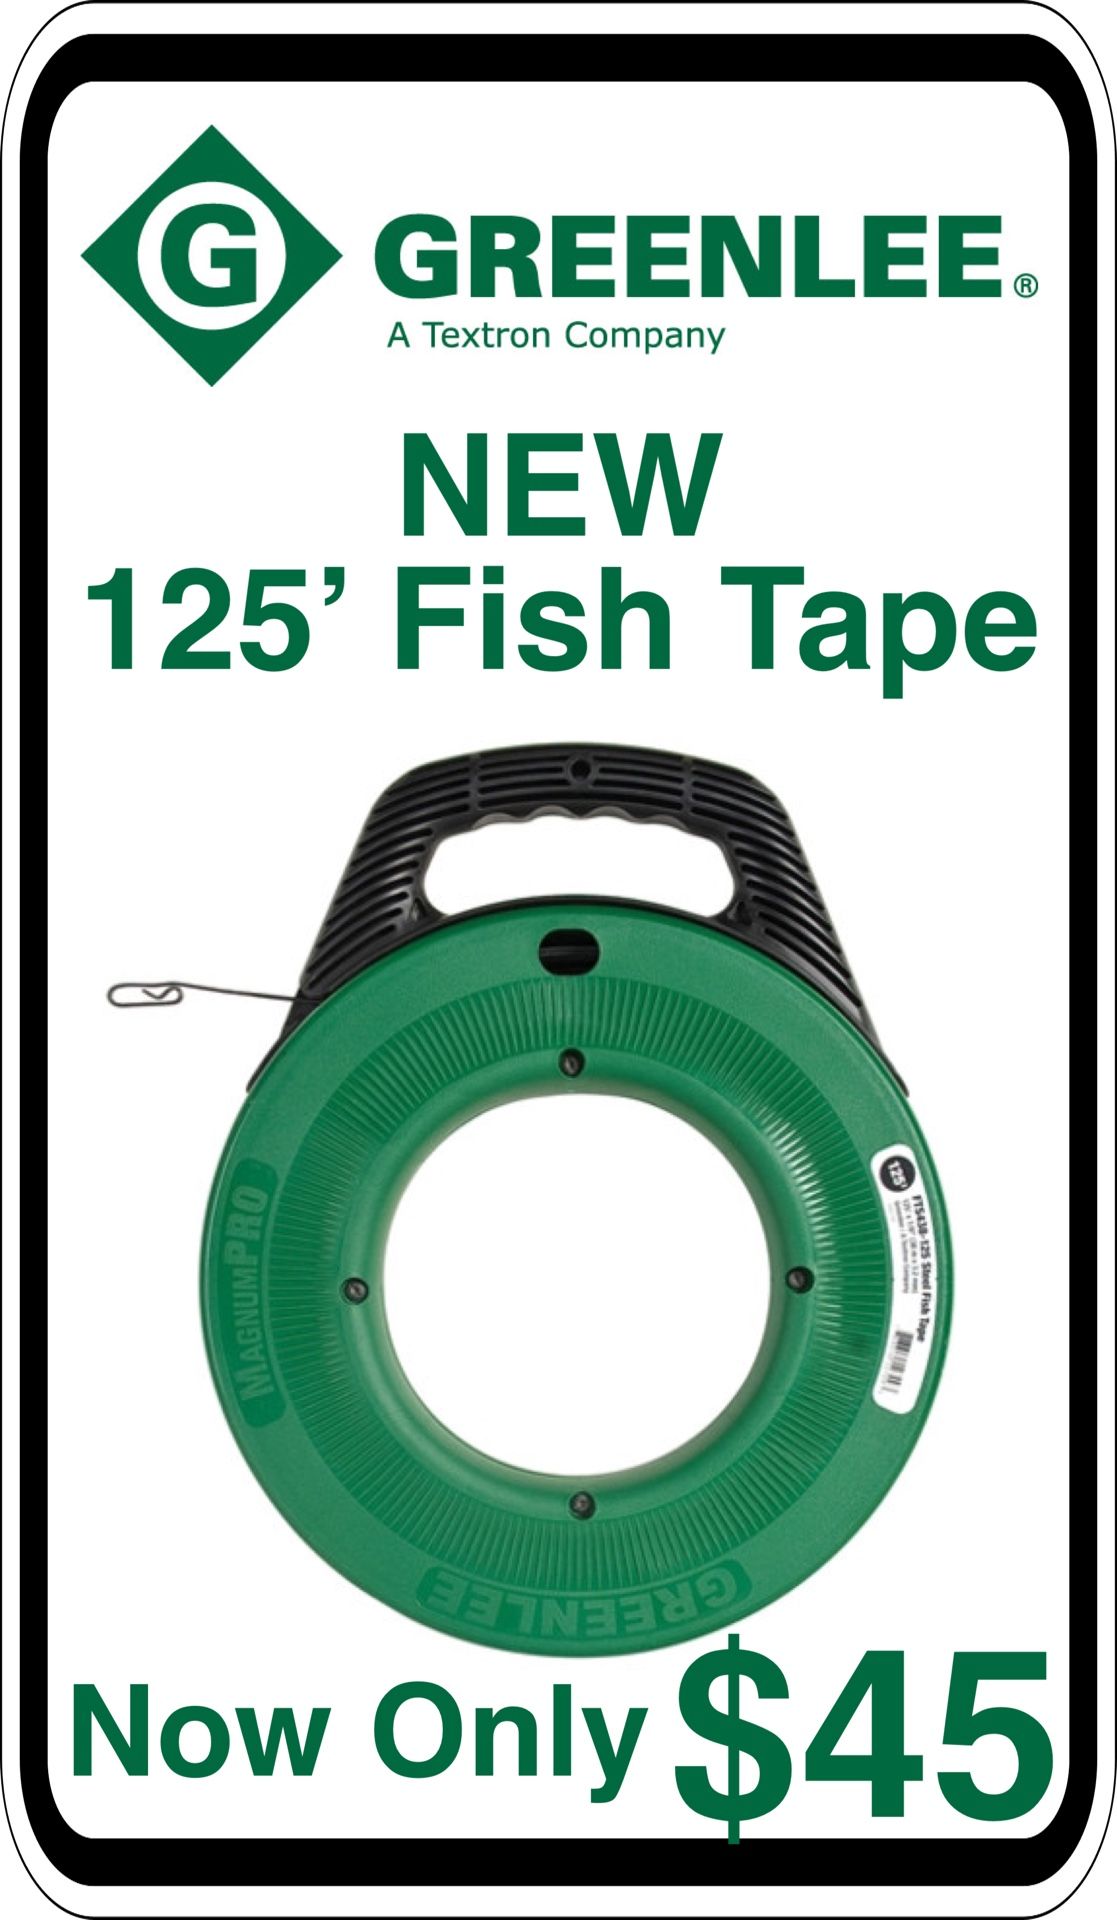 BRAND NEW - Greenlee 125’ Steel Fish Tape - We accept trades & Credit Cards - AzBE Deals